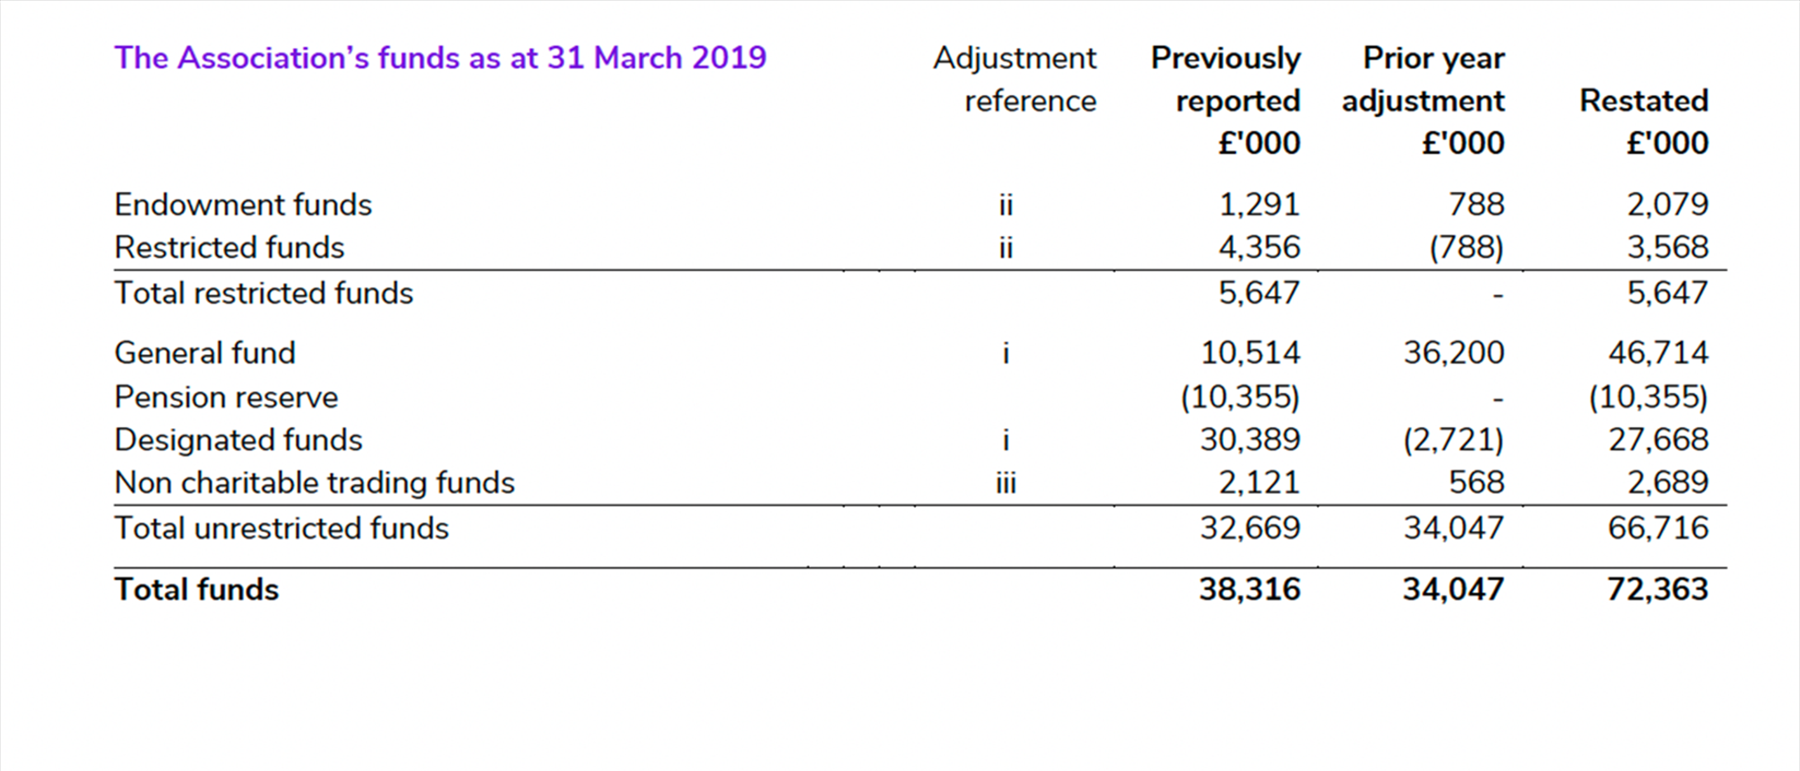 The Association's funds as at 31 March 2019